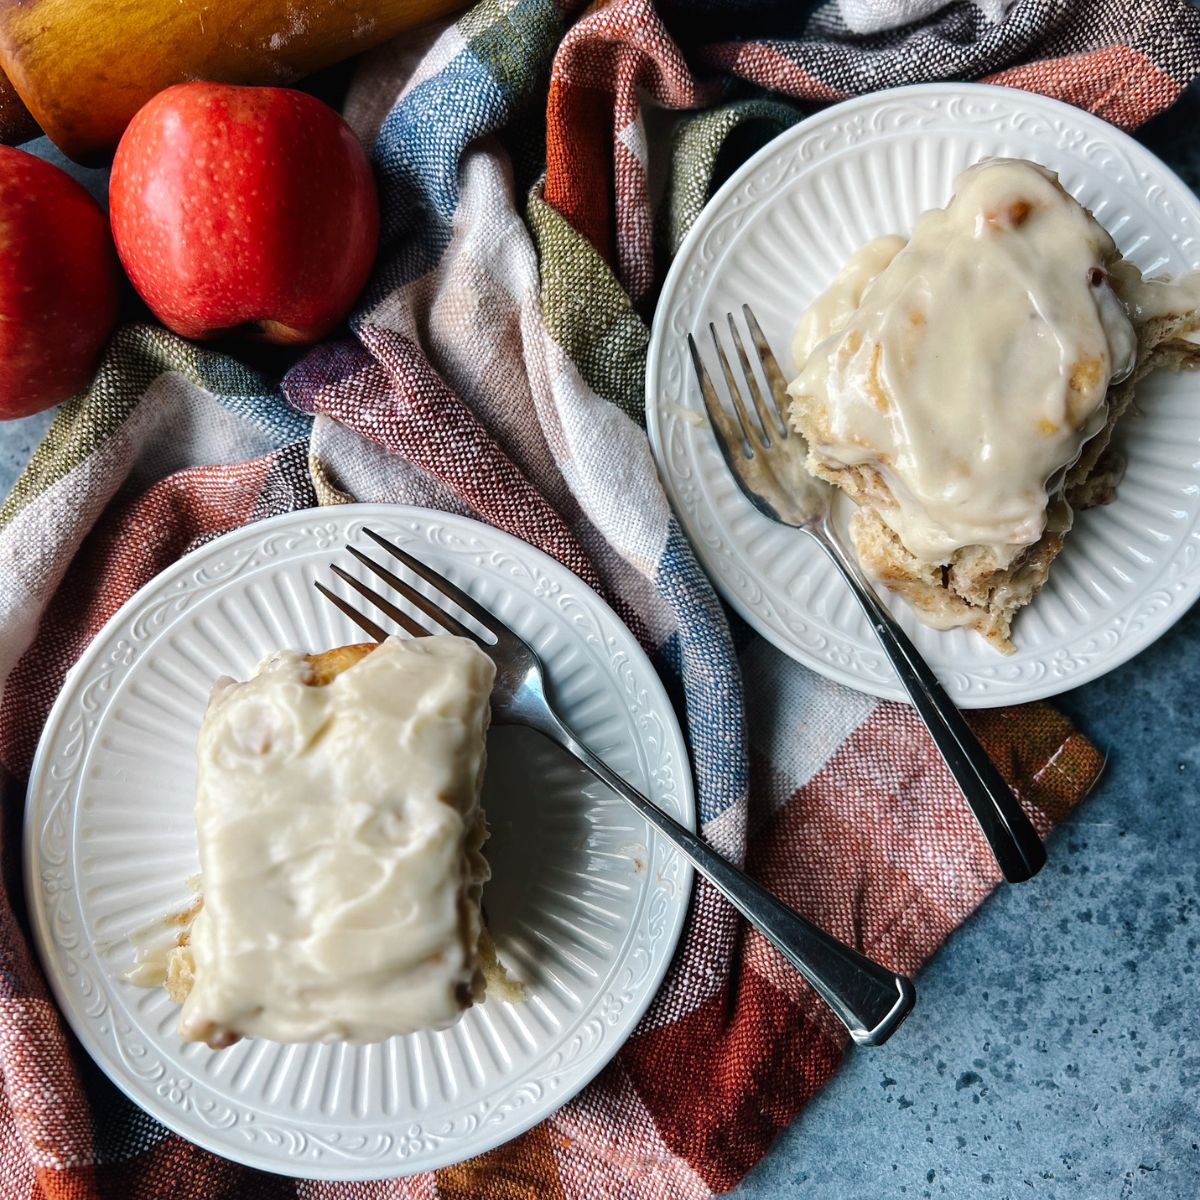 Two cinnamon rolls with caramel cream cheese frosting on plates. There is a plaid tea towel and two apples laid next to them.